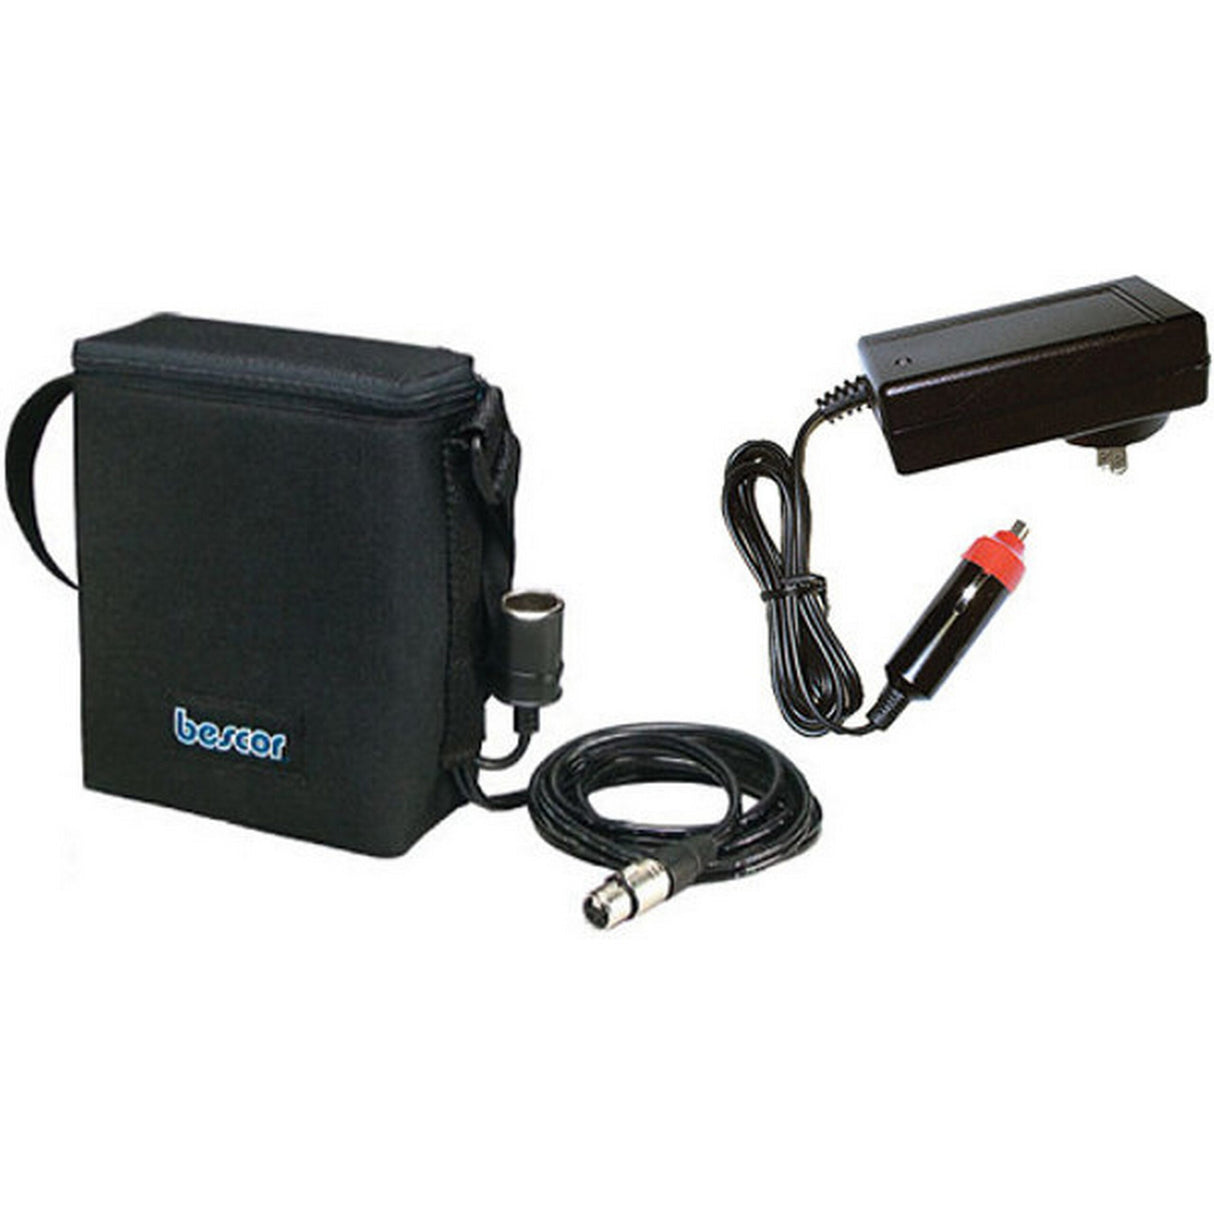 Bescor MM-9XLRATM 12V/9A SLA Battery Pack with 4-Pin XLR and Auto Charger